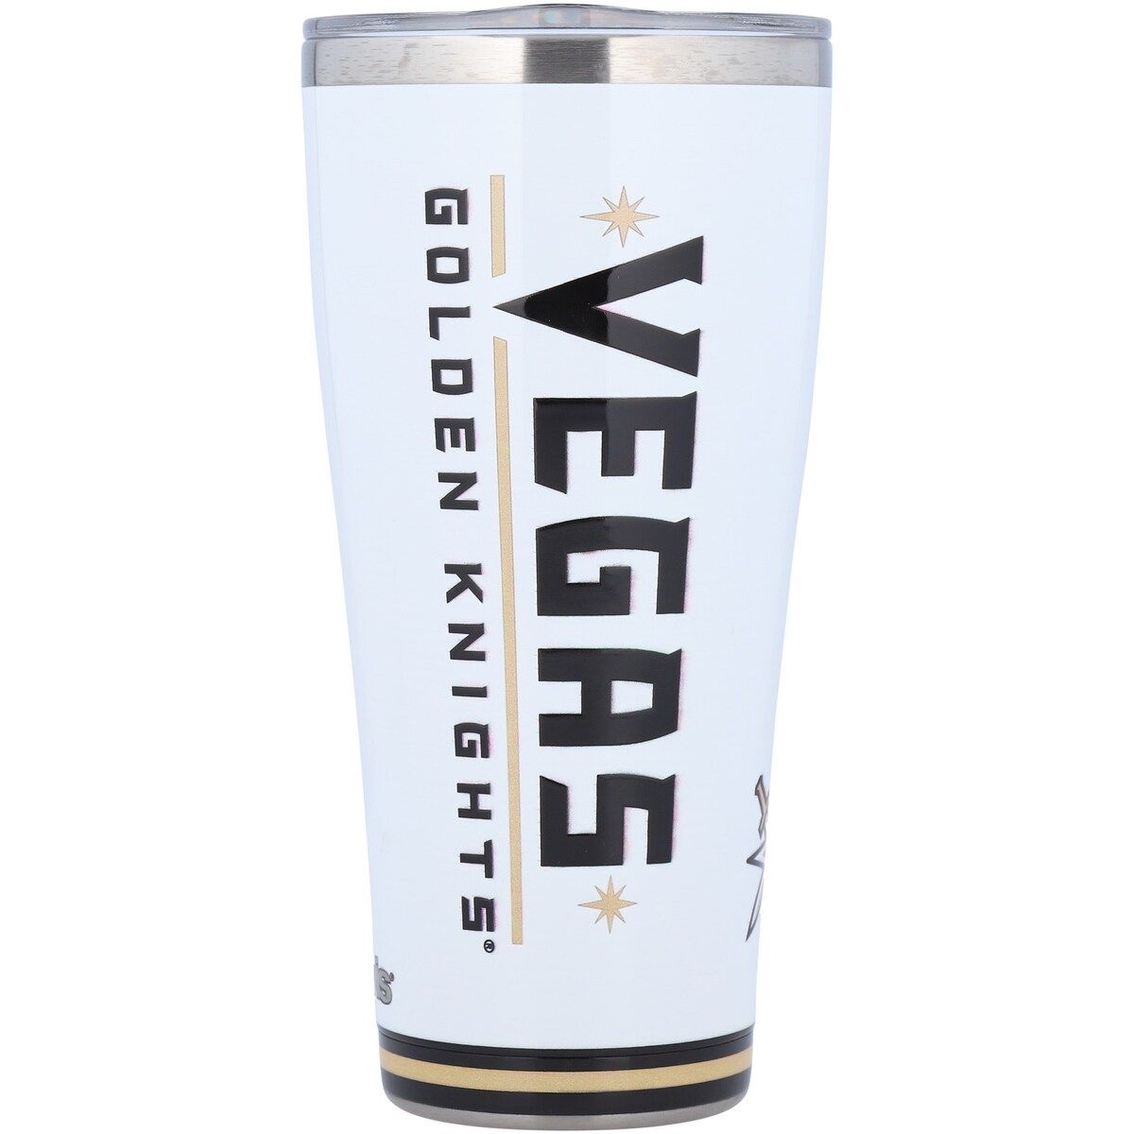 Tervis Vegas Golden Knights 30oz. Arctic Stainless Steel Tumbler - Image 3 of 4